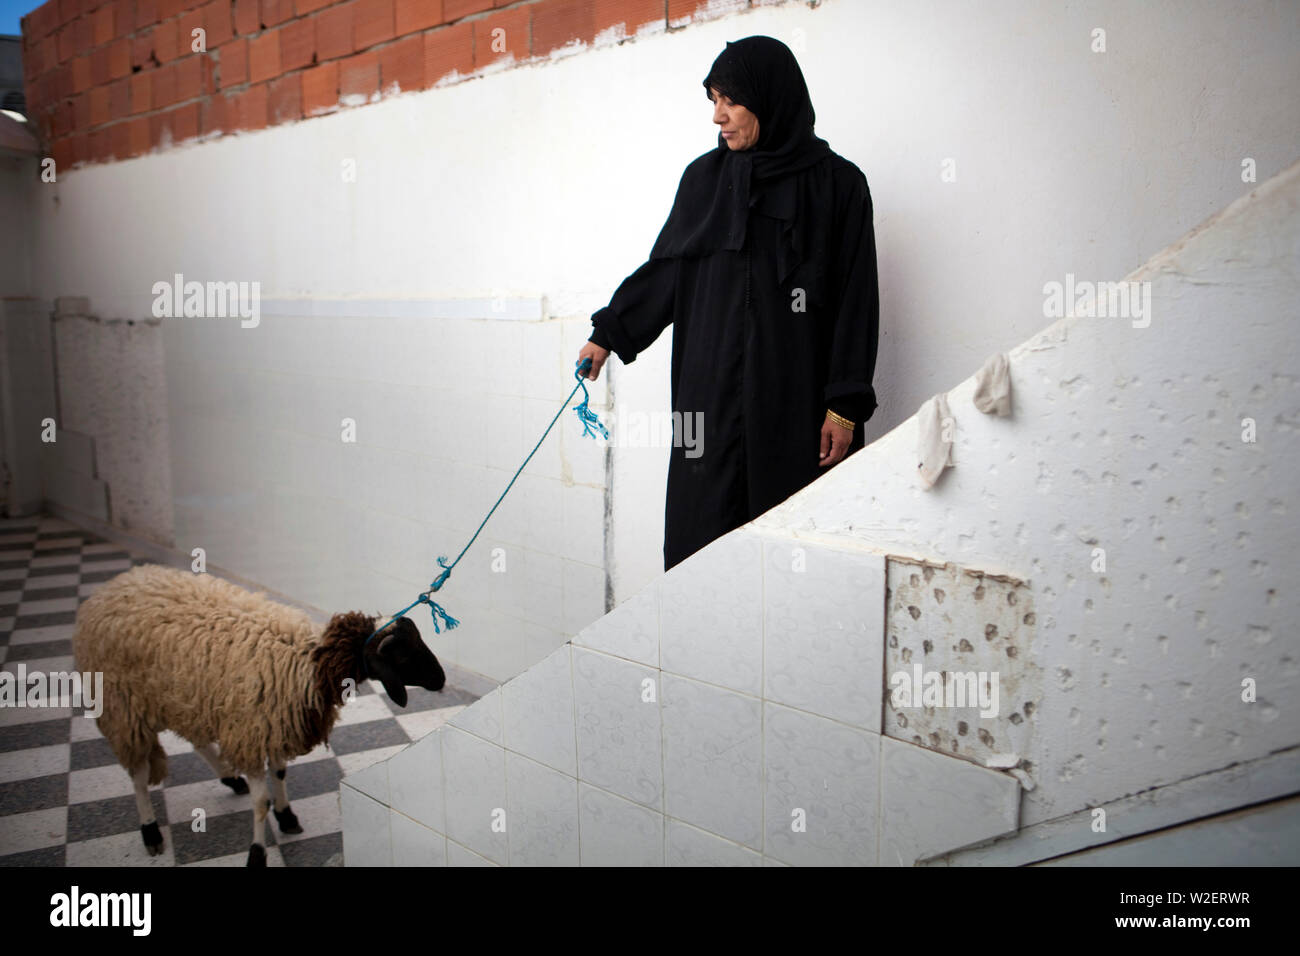 November 6, 2011 – Kairouan, Tunisia - A Muslim Tunisian woman before  slaughtering a sheep for the Muslim celebration of Eid Al-Adha at her house  in Kairouan. Kairouan is considered by many